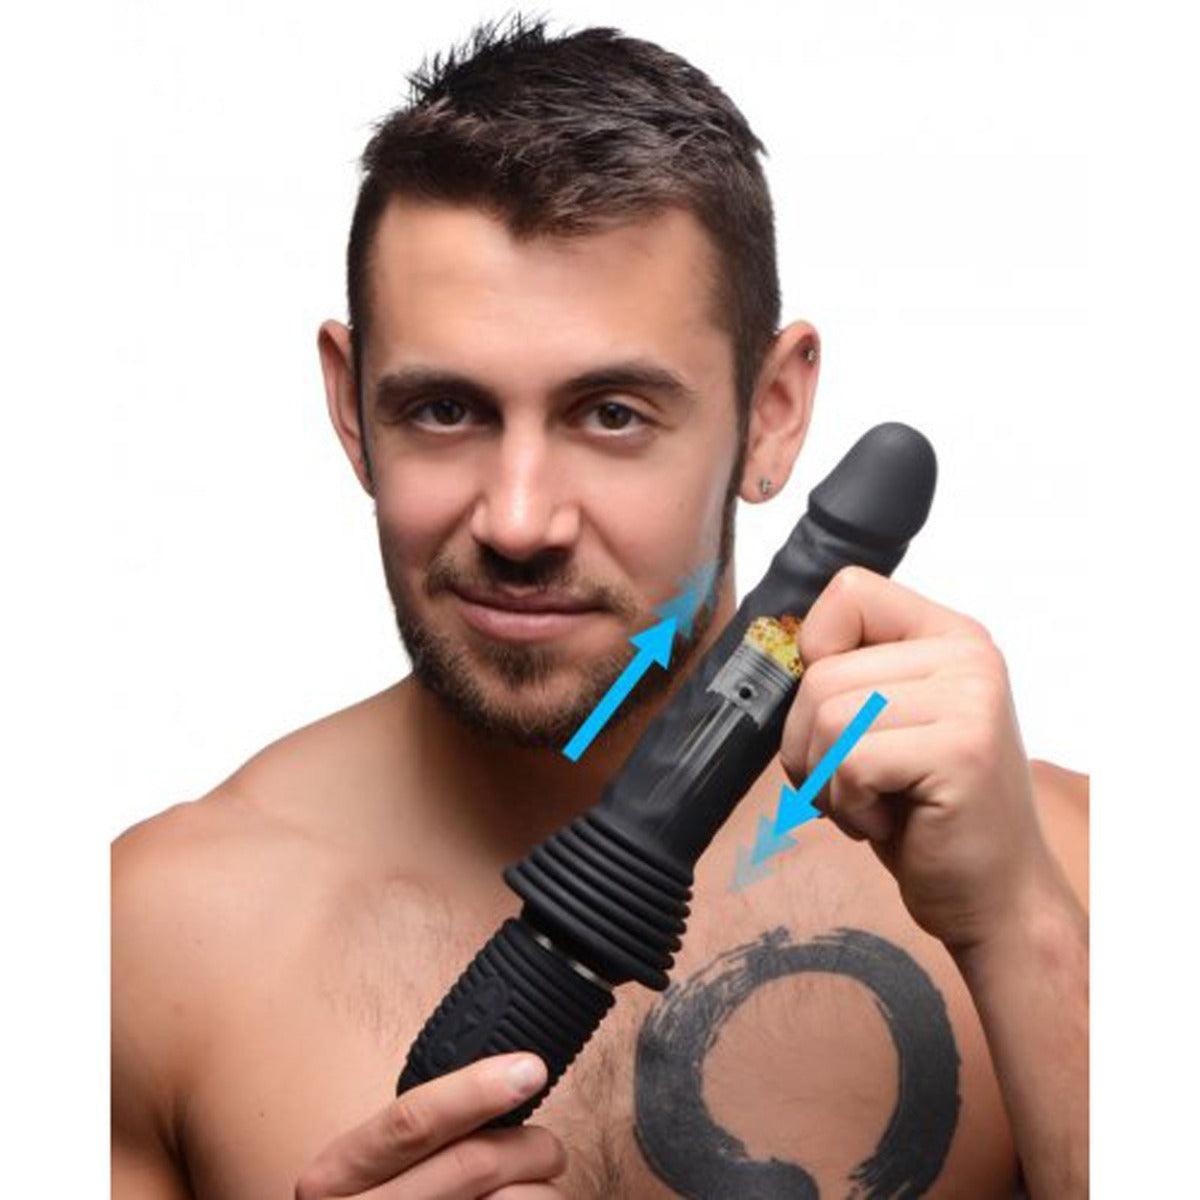 Master Series 10X Thrust Master Black Vibrating and Thrusting Dildo with Handle